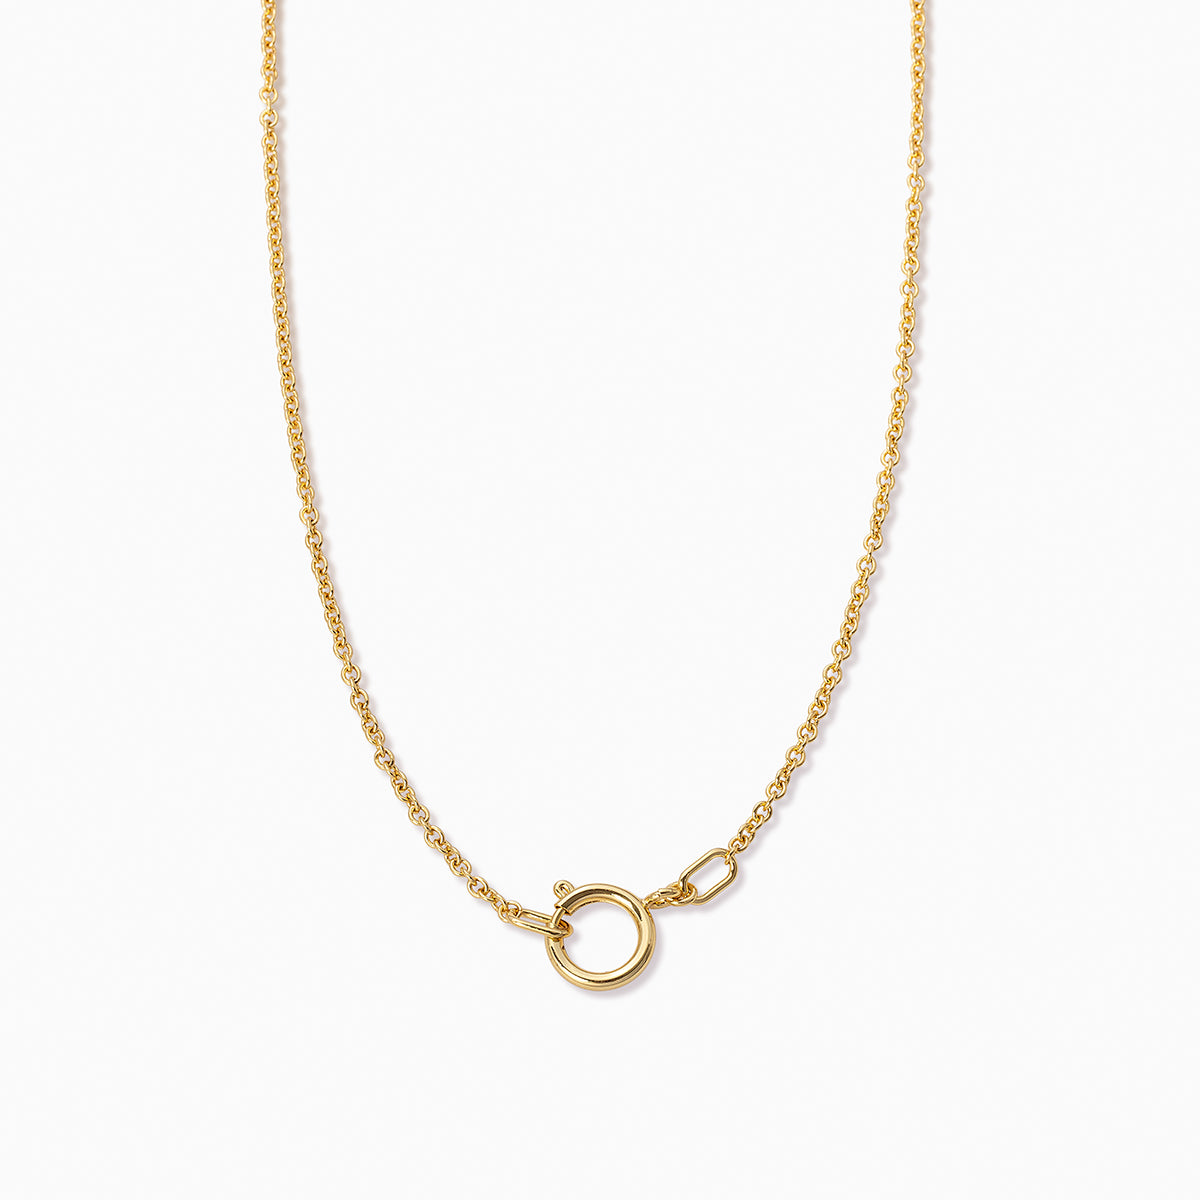 Charming Necklace | Gold | Product Image | Uncommon James